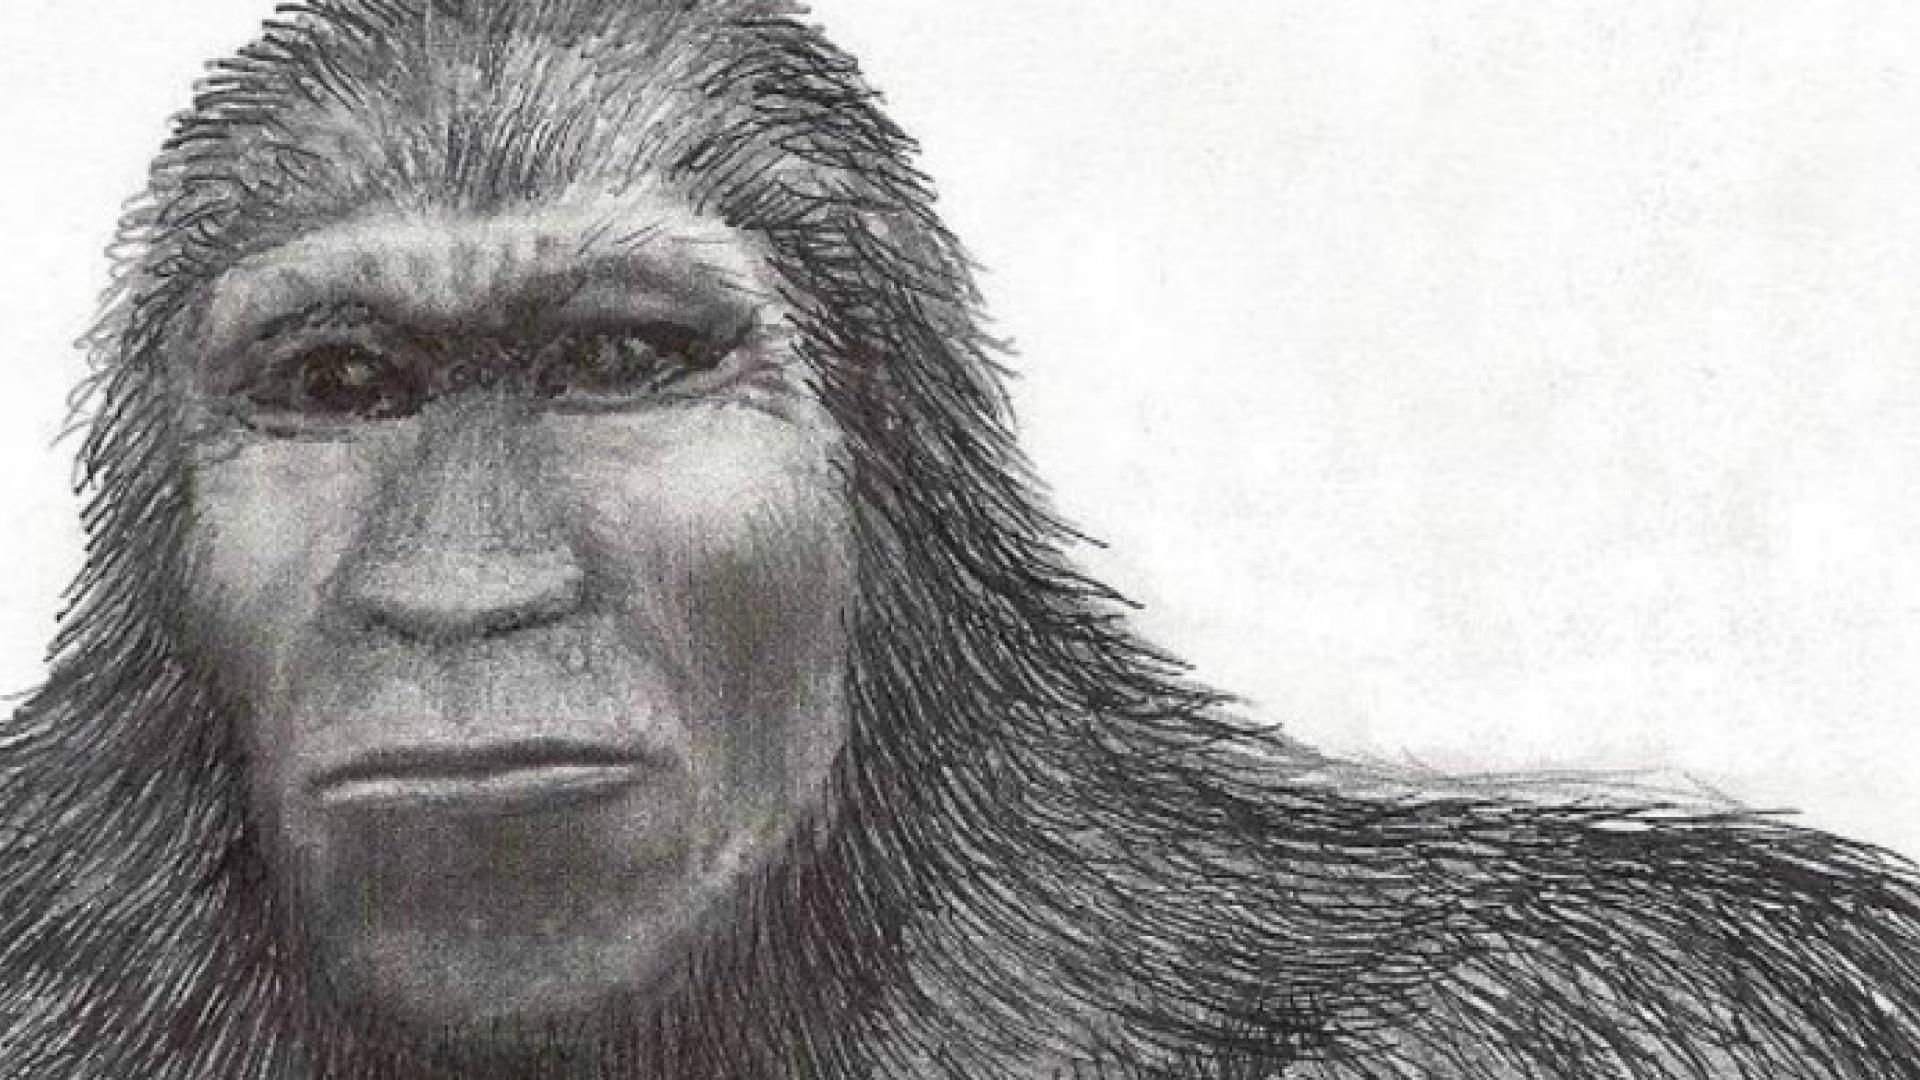 Mythical or mysterious -- search for Bigfoot alive among Montana